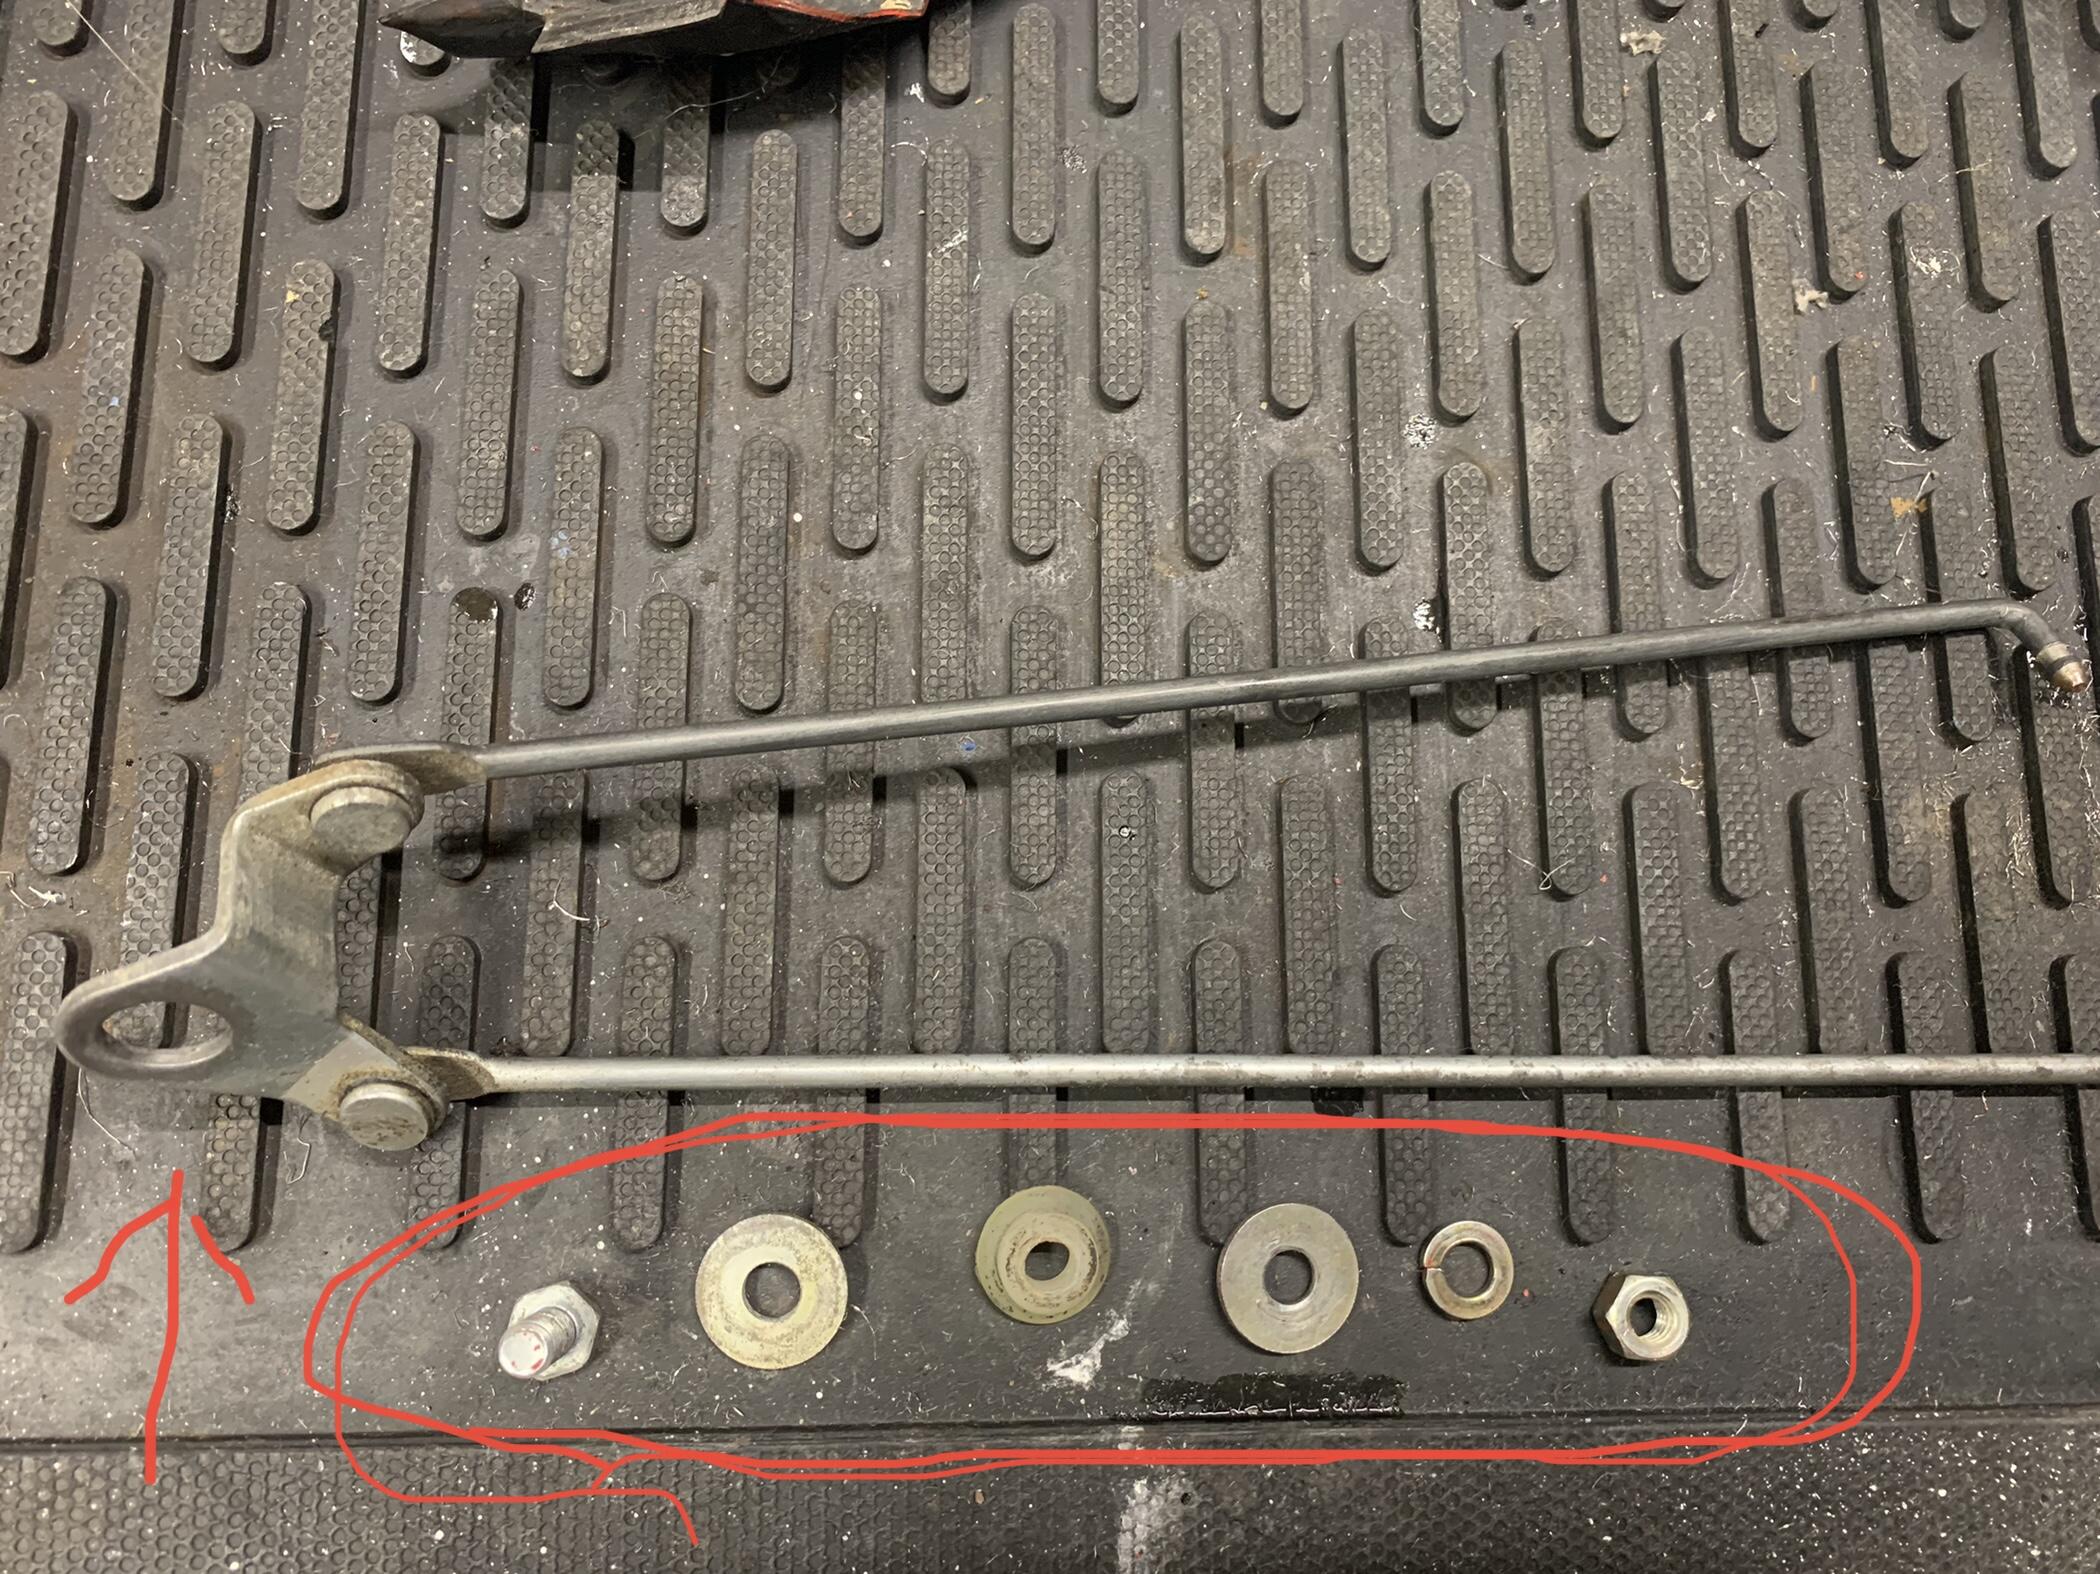 WTB: Driver side door handle linkage parts for a 1971